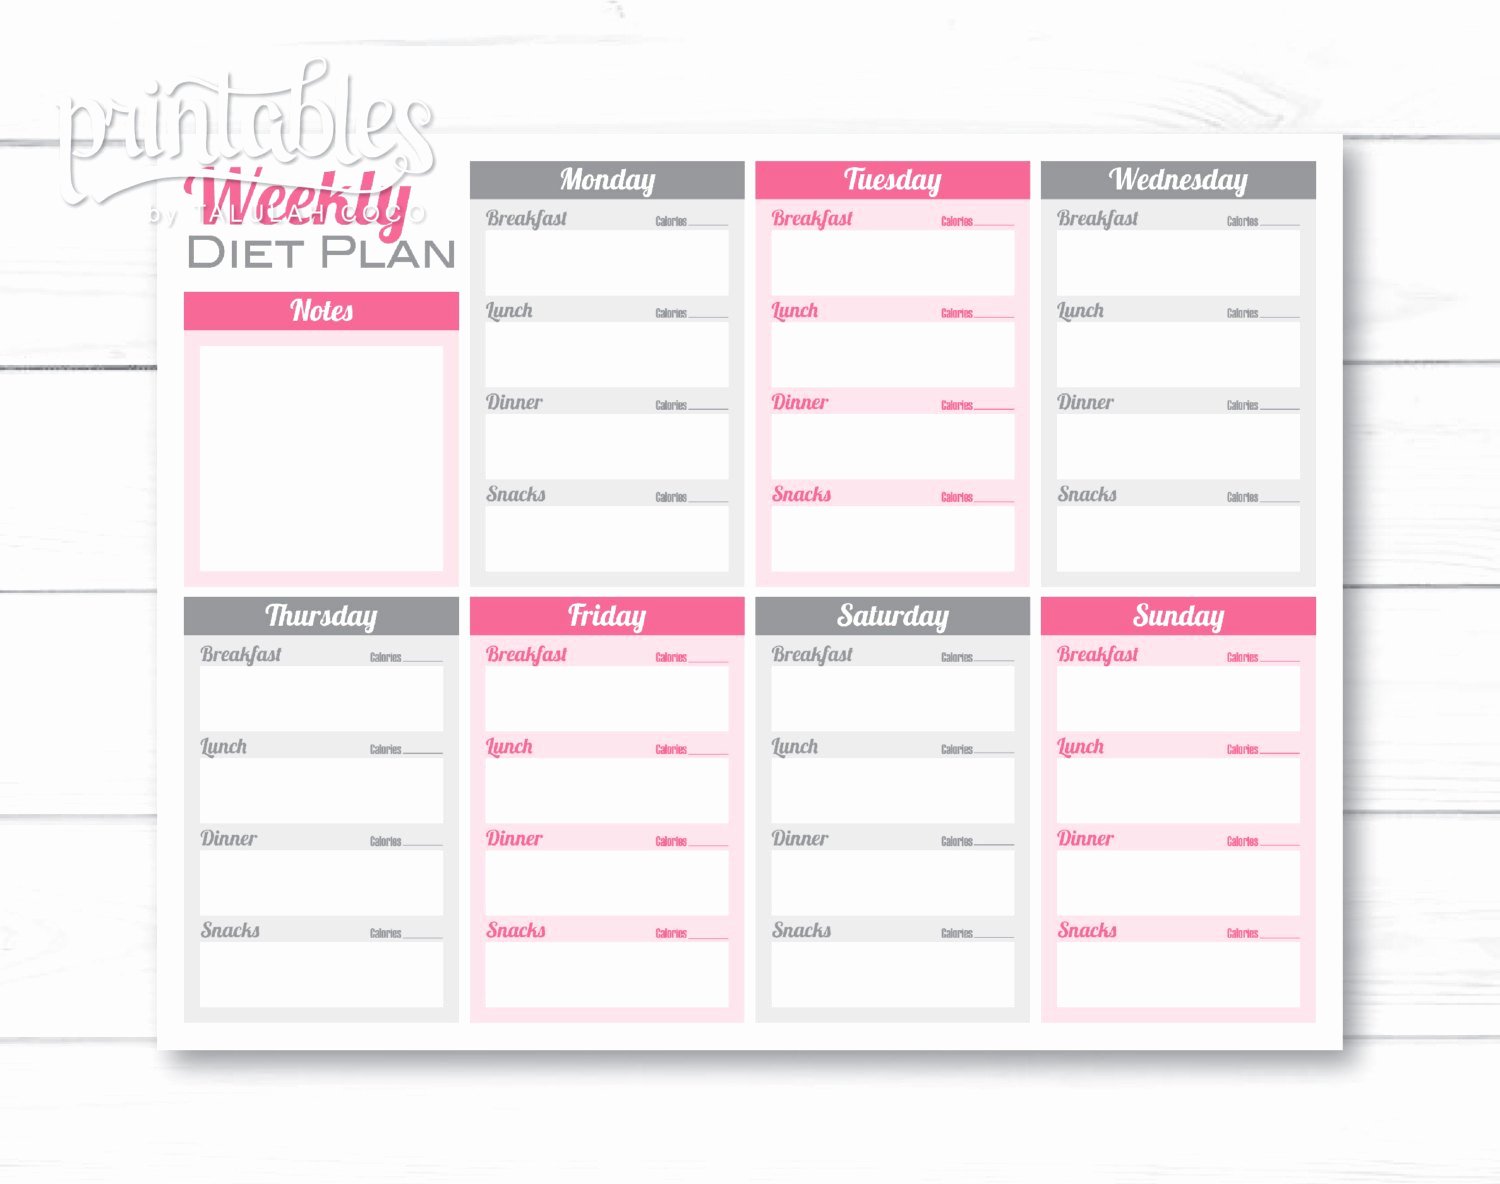 Monthly Meal Plan Template New Weekly Meal Planner Pdf Editable Meal Planner for Weight